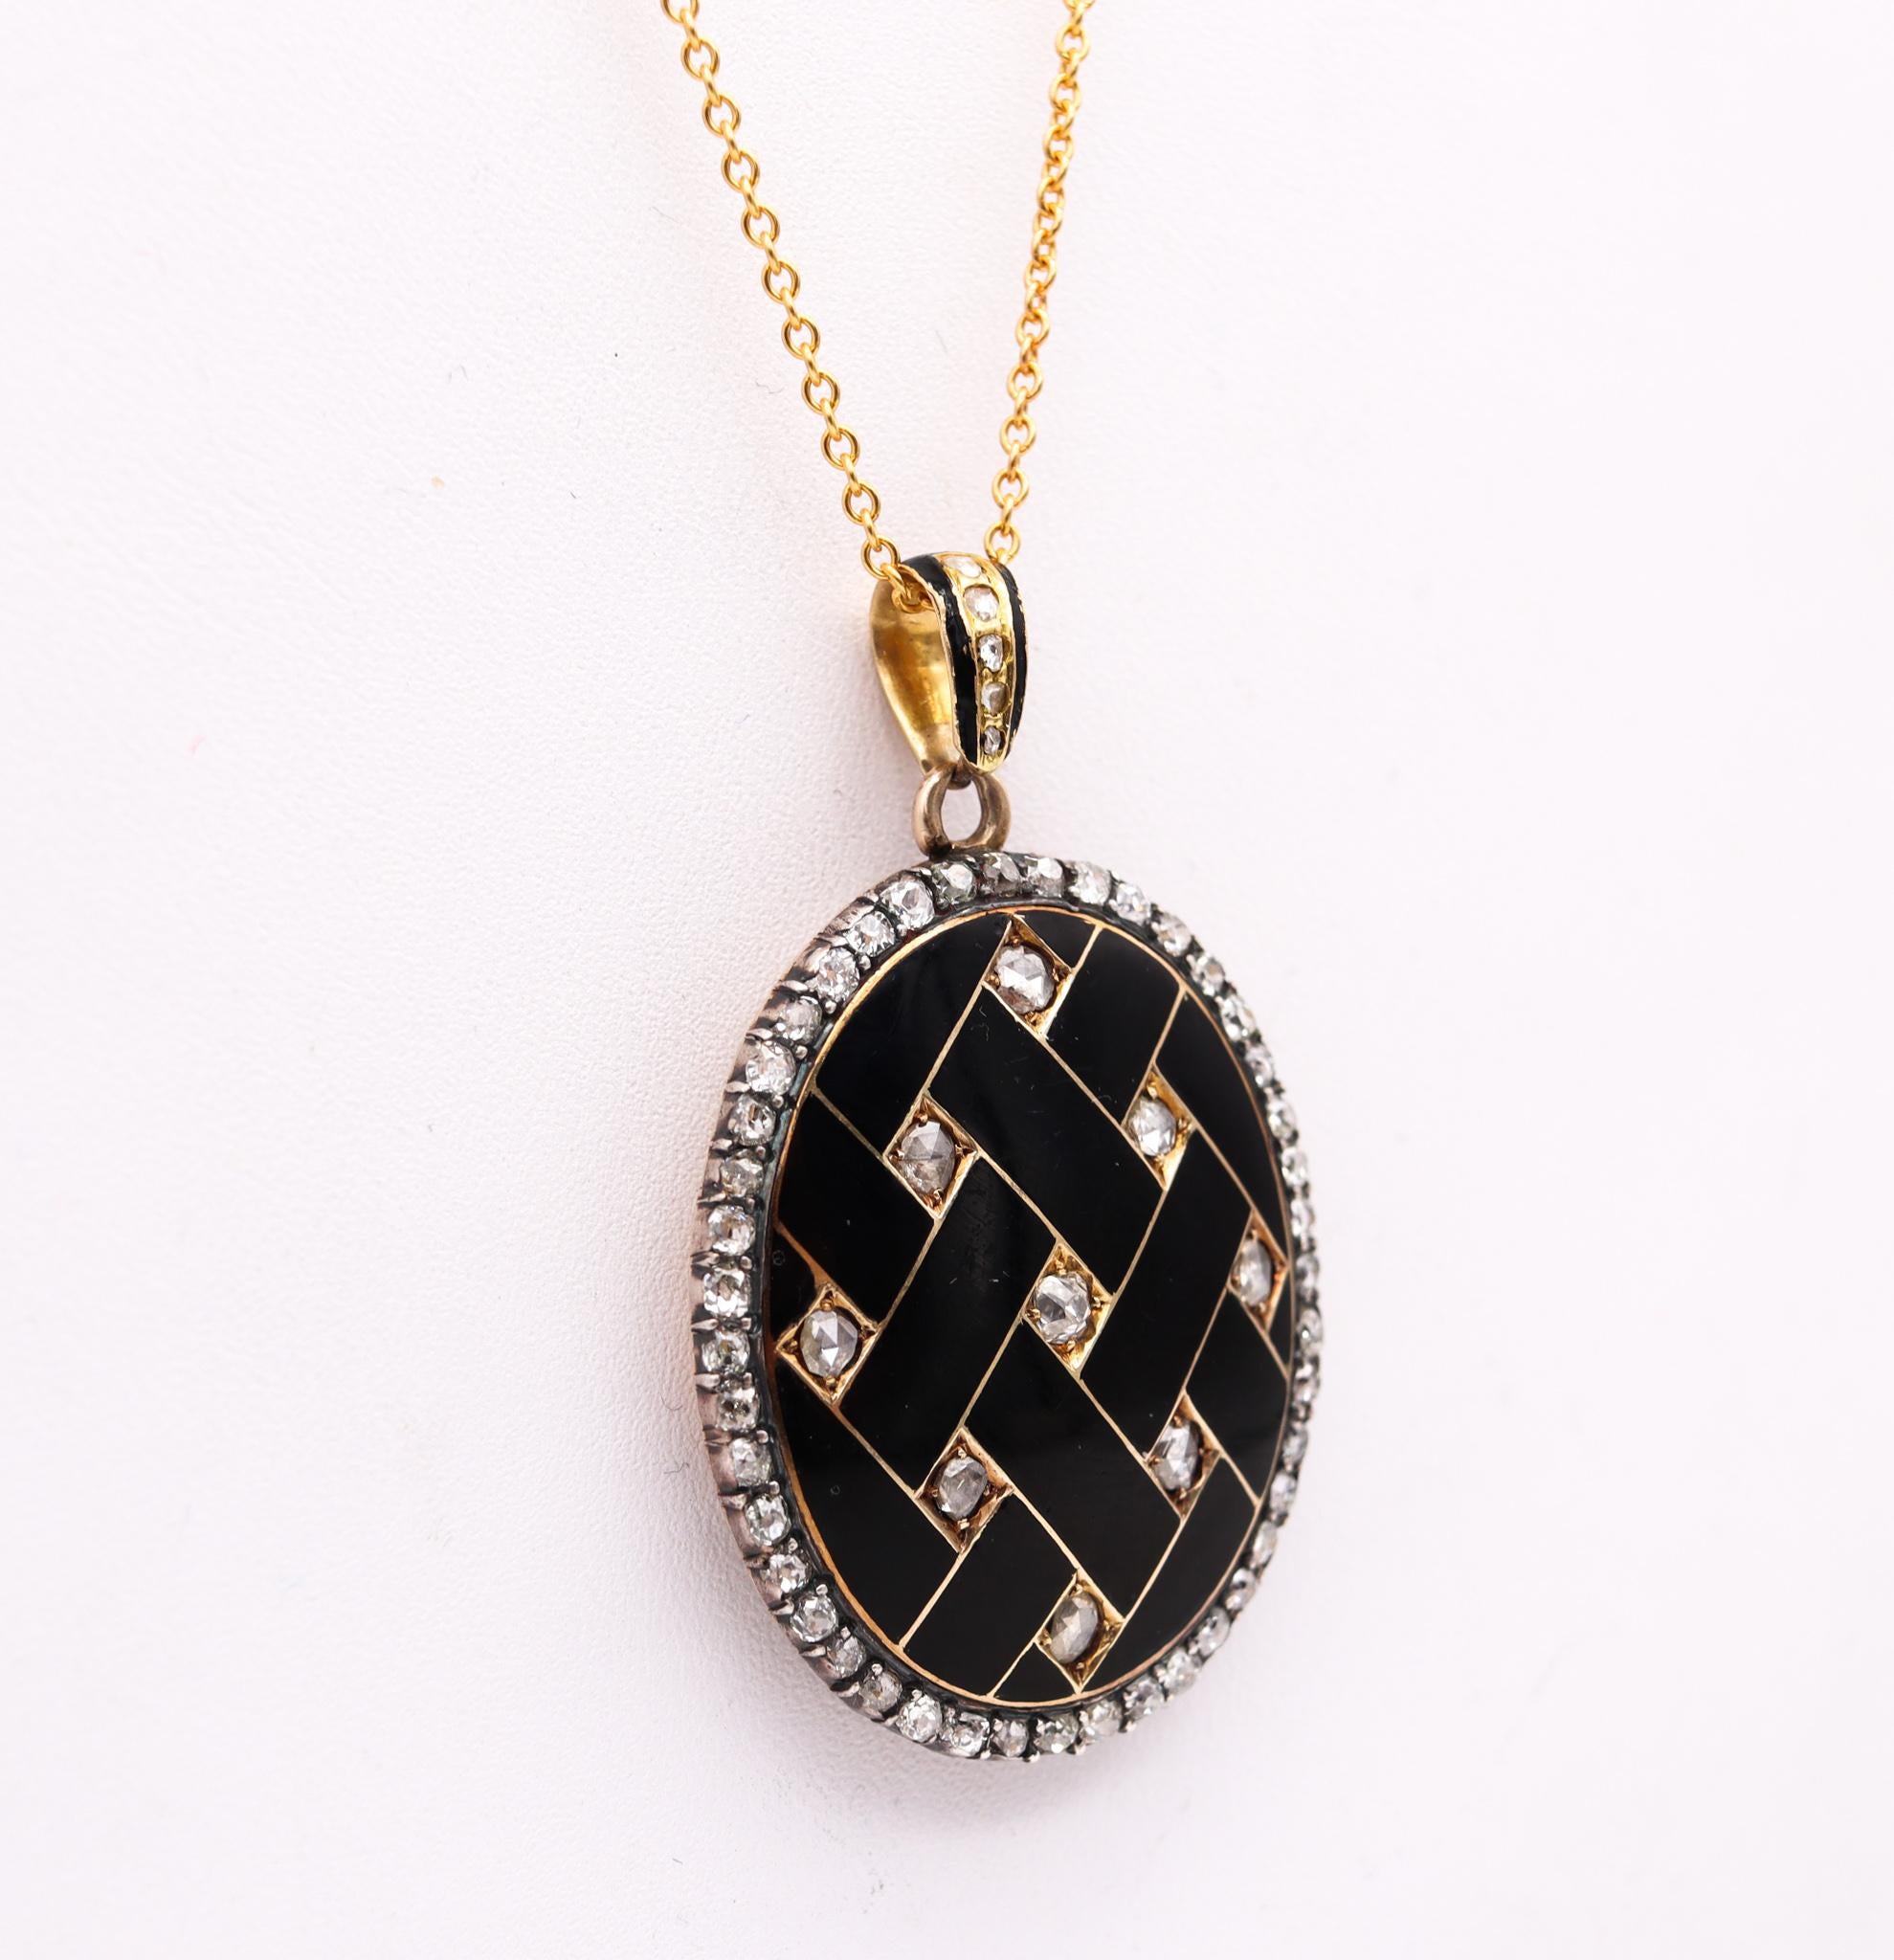 Very rare pendant locket from the Victorian Era.

Exceptional piece, created in England during the Victorian period, back in the 1870. This important pendant locket has been made up with an extremely unusual geometric pattern of a lattice. It was